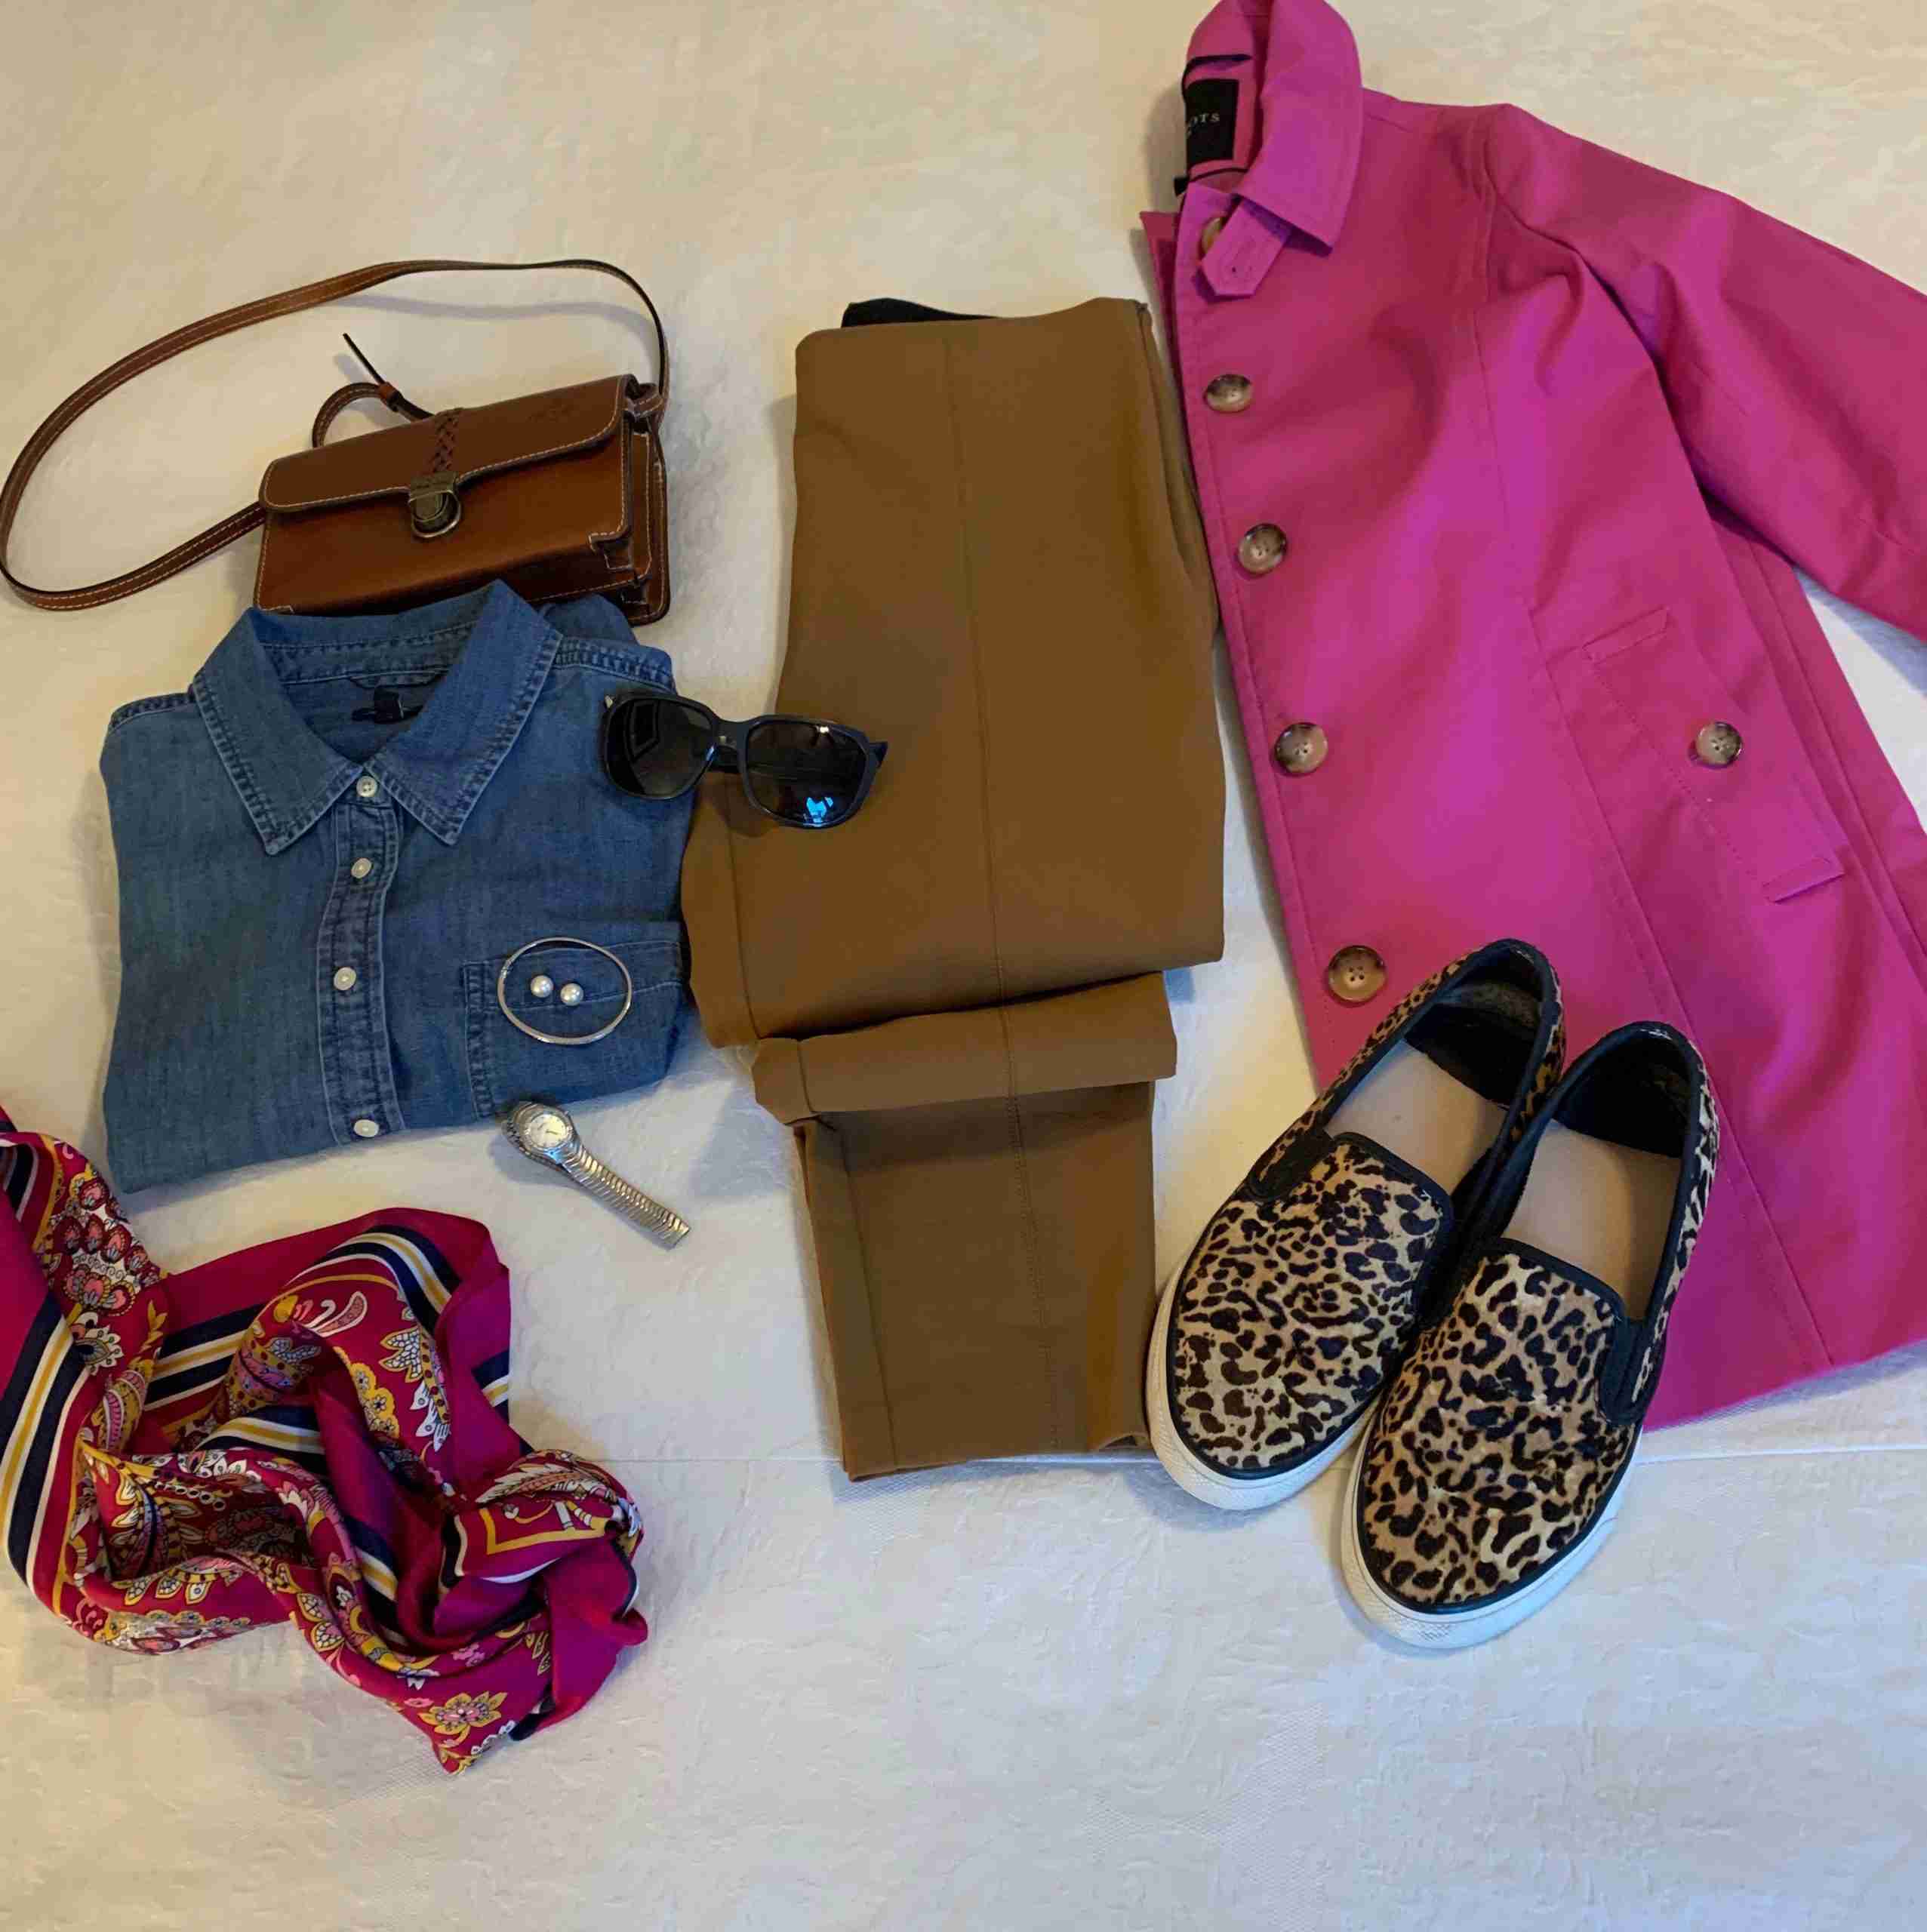 pink/violet coat with tobacco brown slim pants, a brown crossbody bag, a denim shirt, and a vibrant pink, paisley scarf.